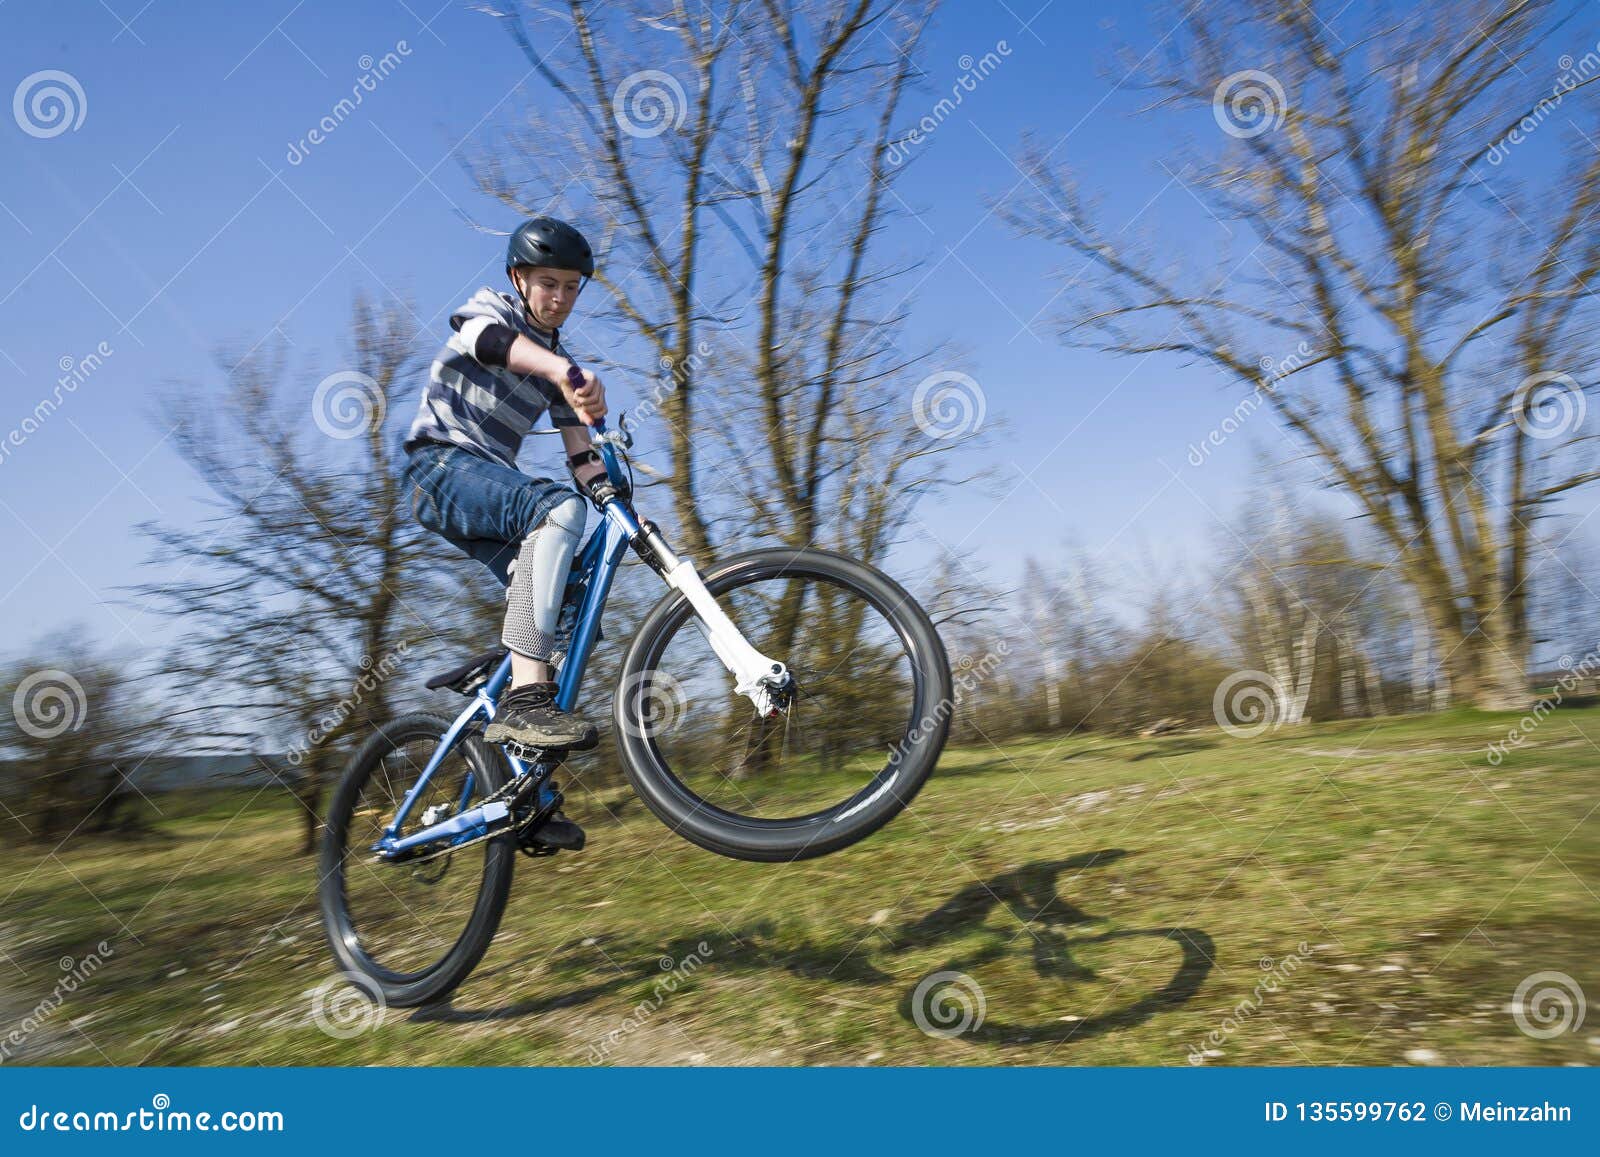 Boy Jumping with His Dirt Bike Stock Photo - Image of helmet, teenager ...